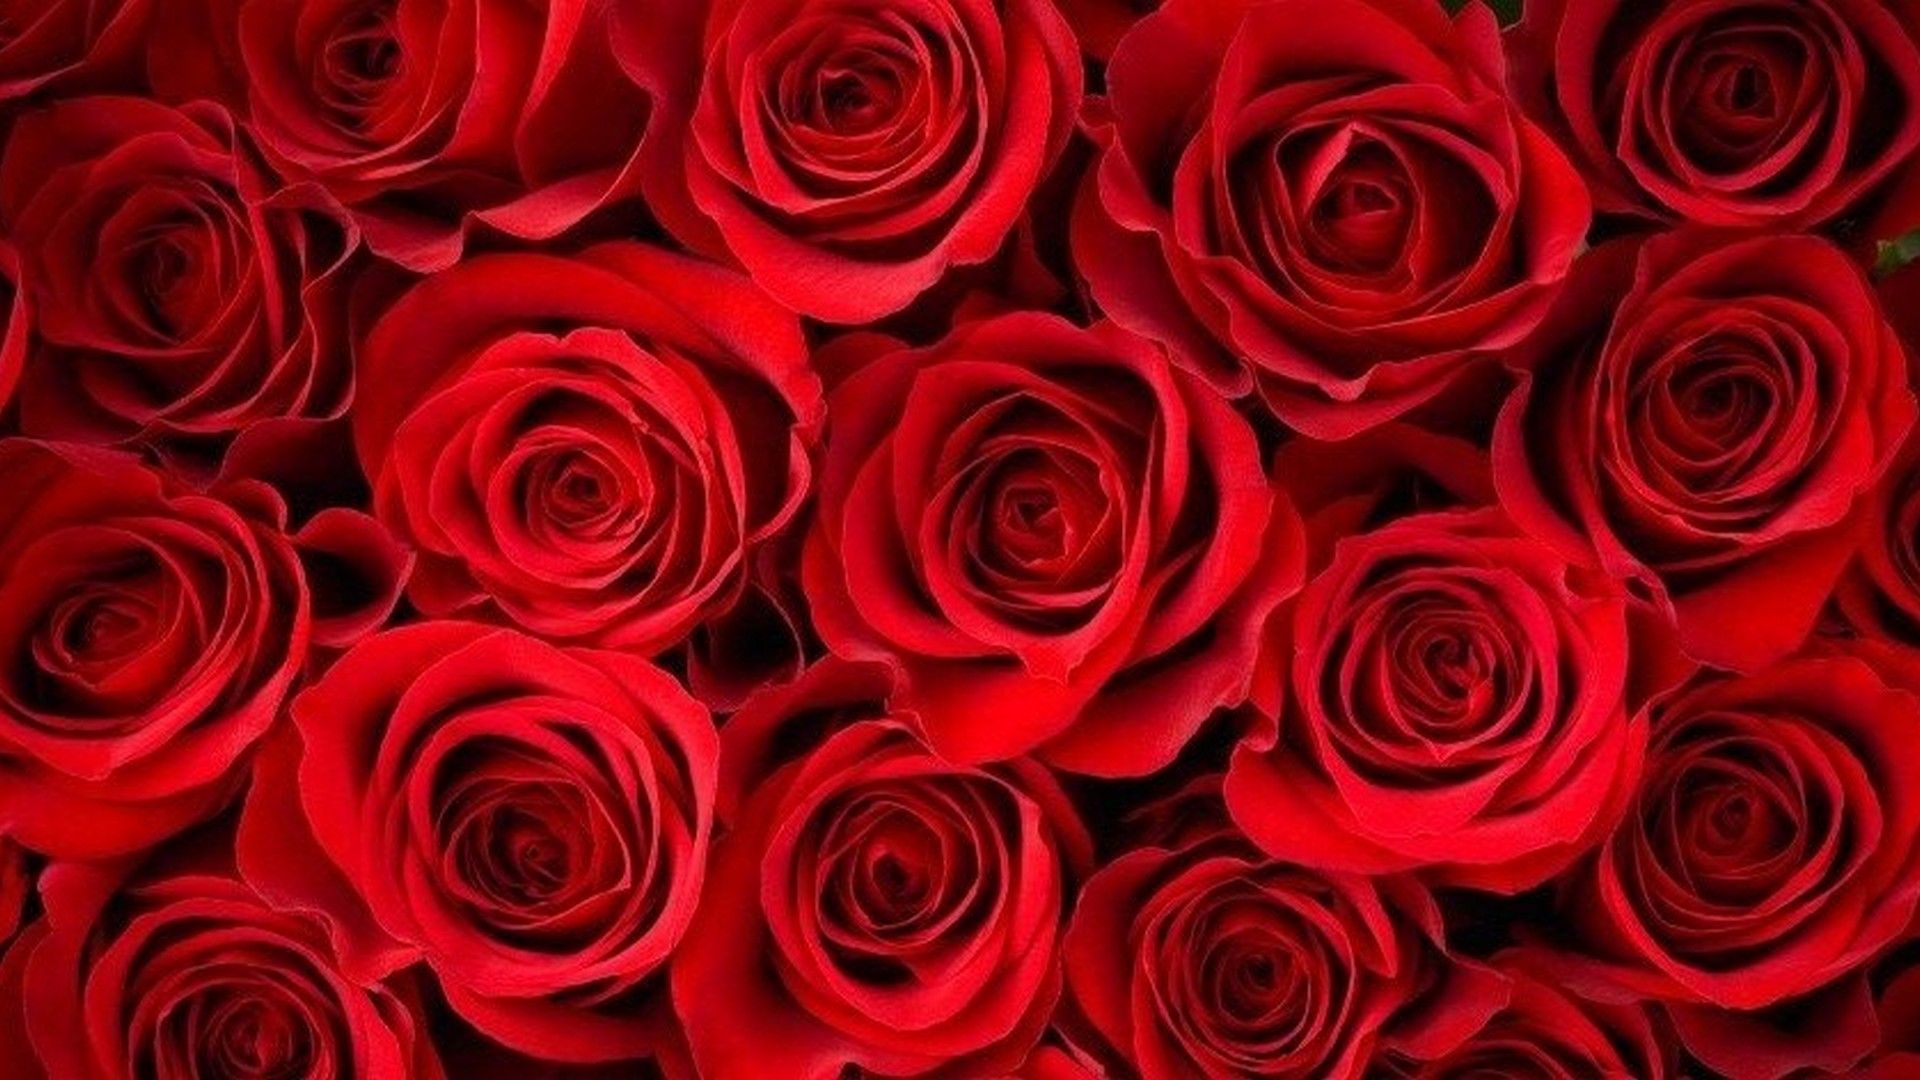 HD Red Rose Wallpaper Timeline Covers Background